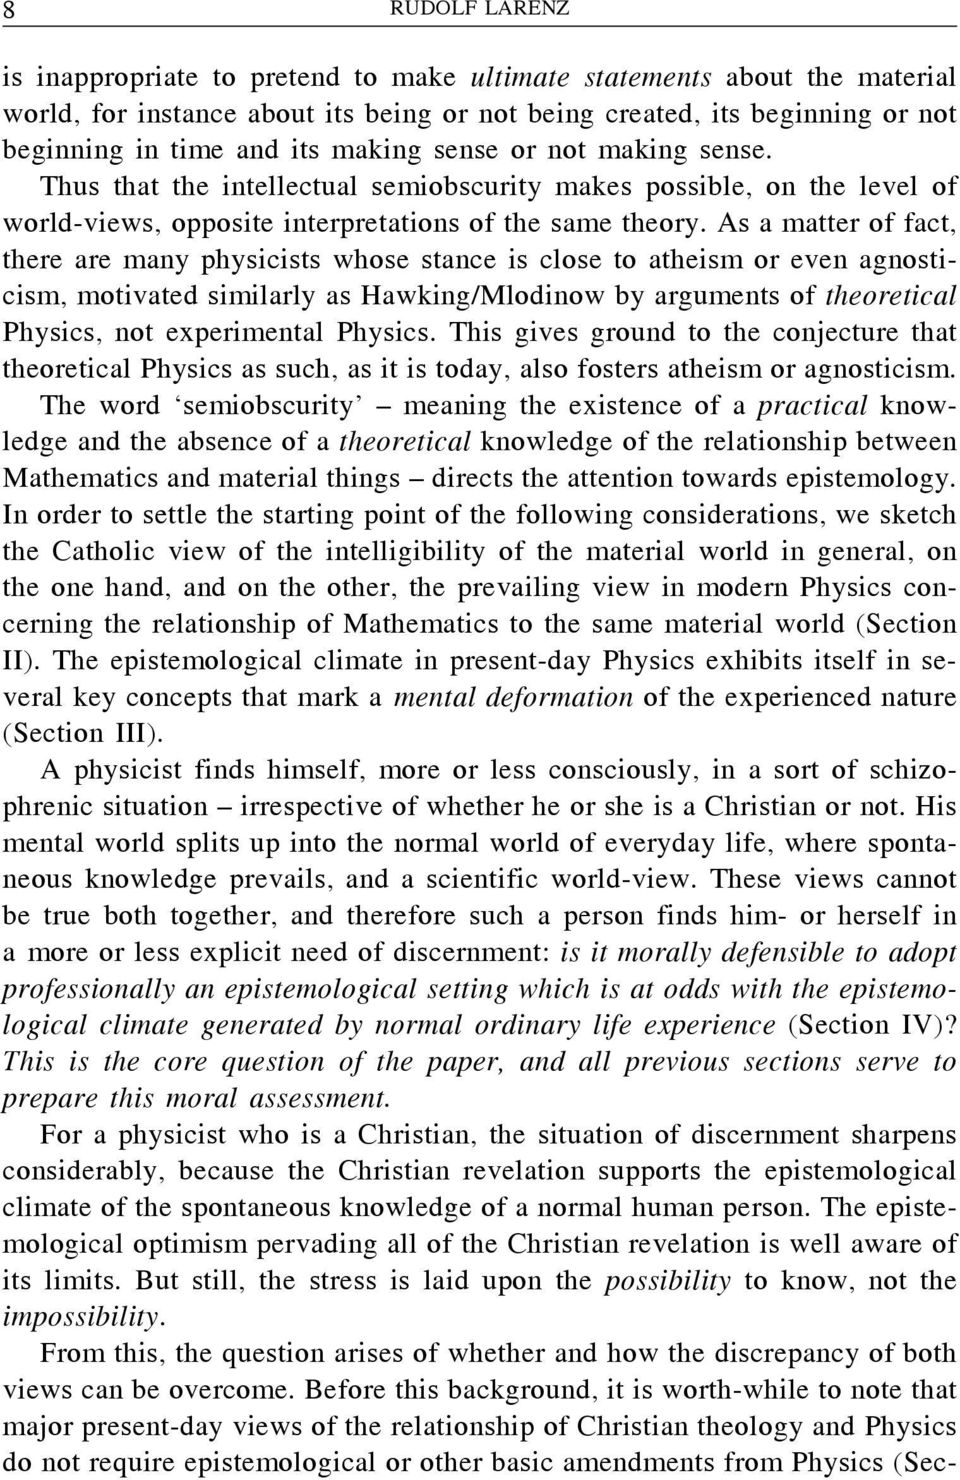 As a matter of fact, there are many physicists whose stance is close to atheism or even agnosticism, motivated similarly as Hawking/Mlodinow by arguments of theoretical Physics, not experimental